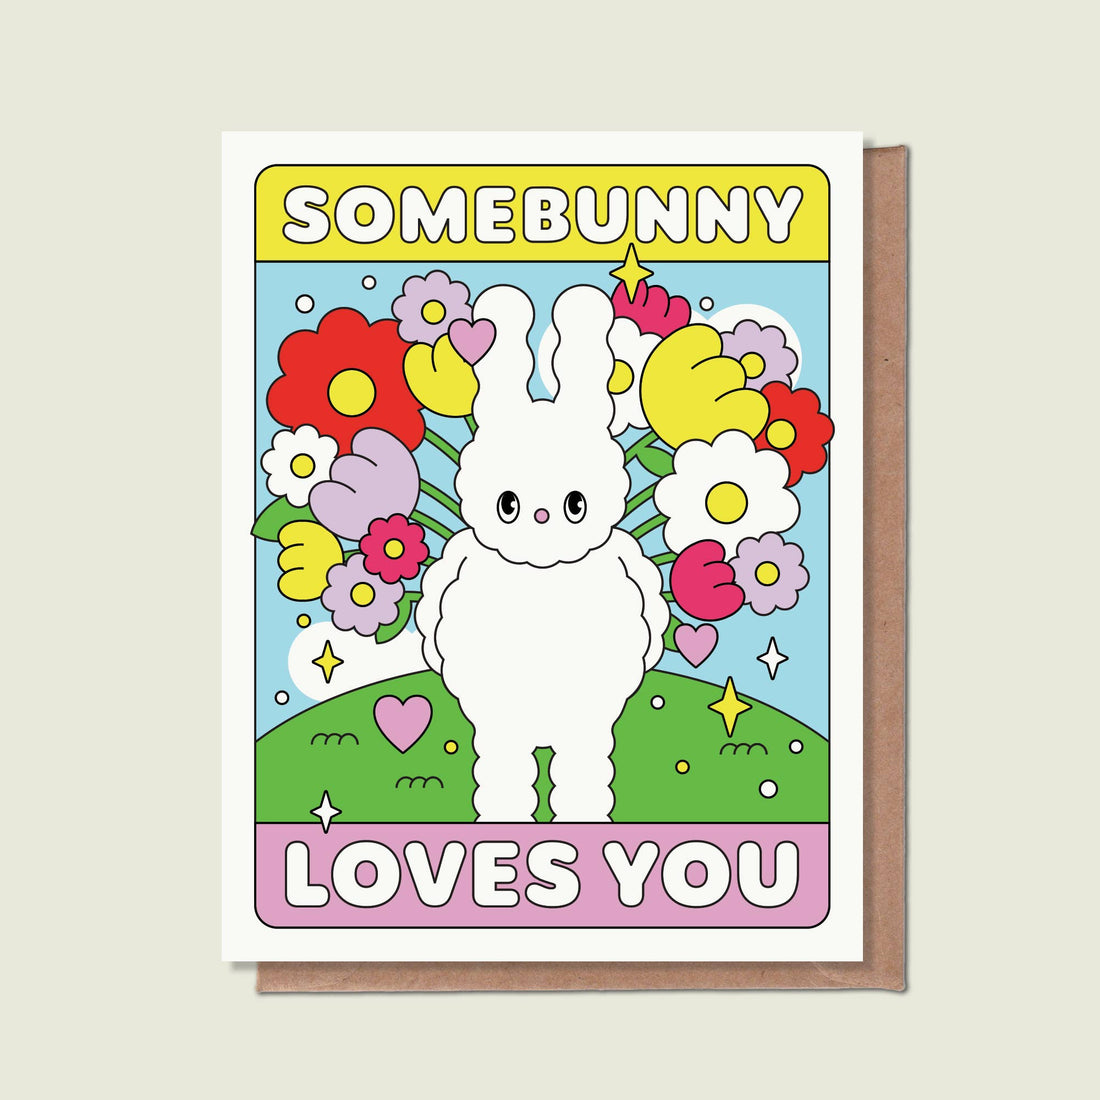 Somebunny Loves You Greeting Card - Parkette.